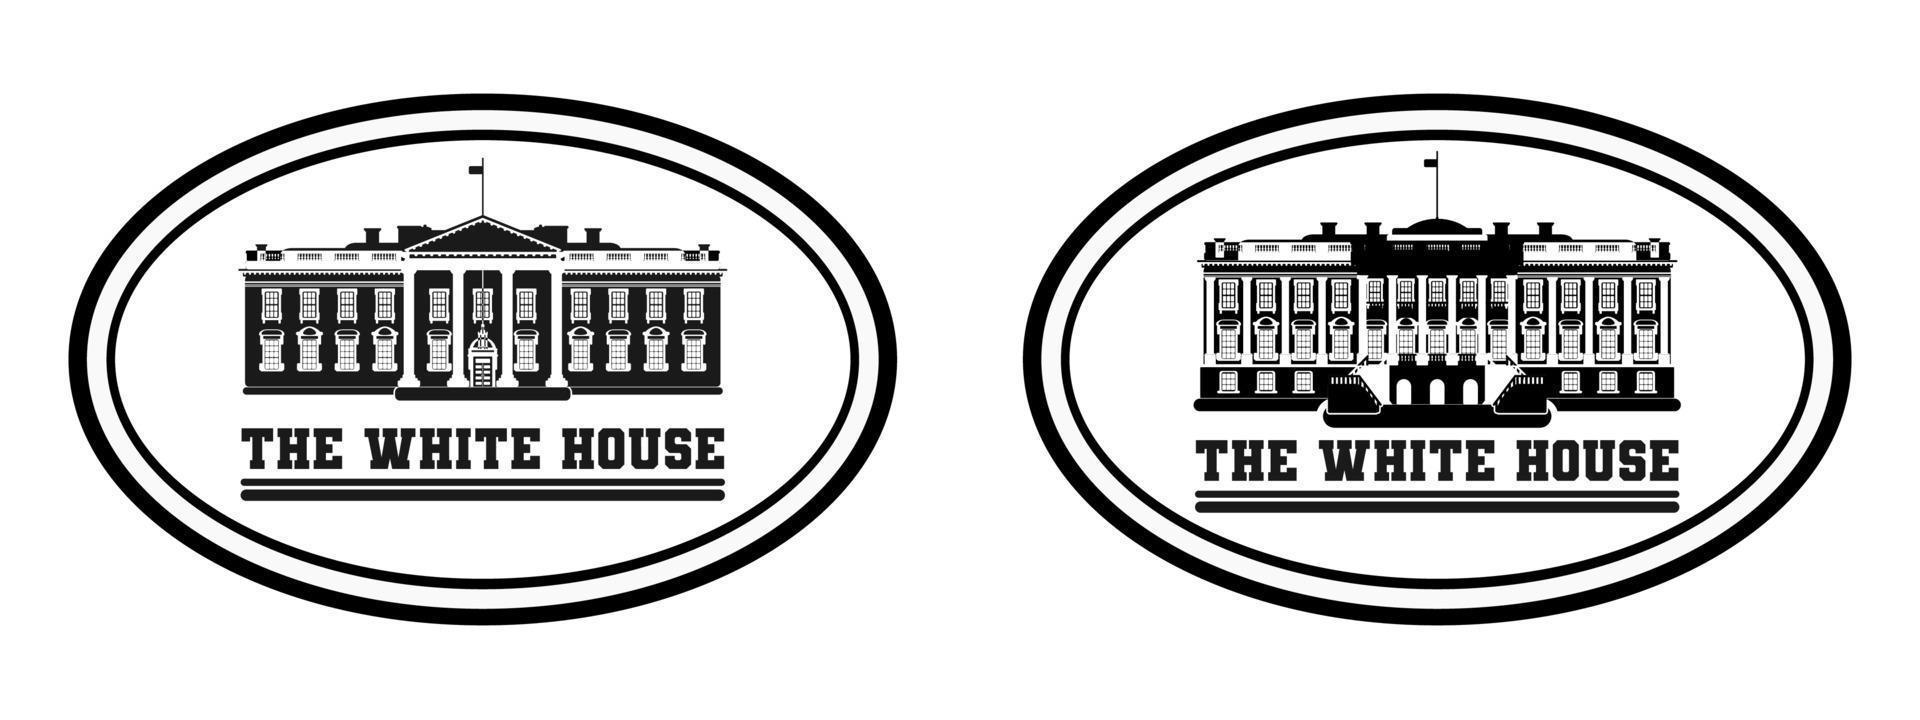 stamp logo white house black and white sketch flat vector